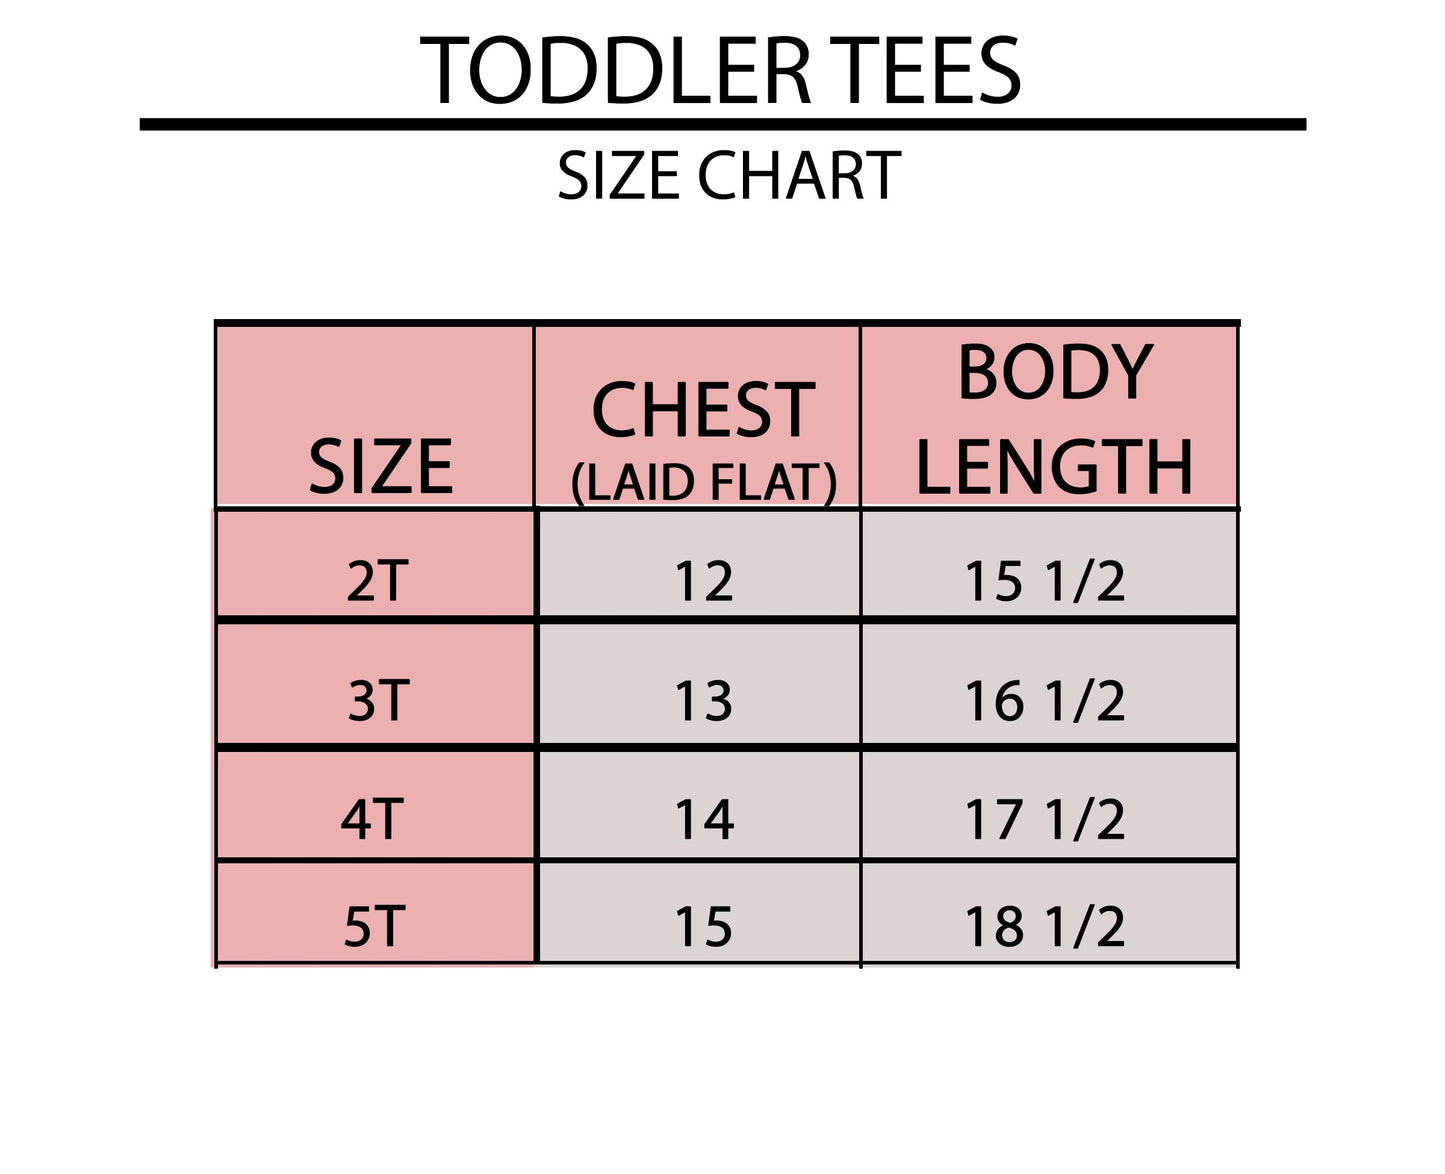 Mr. Steal Your Heart | Toddler Short Sleeve Crew Neck